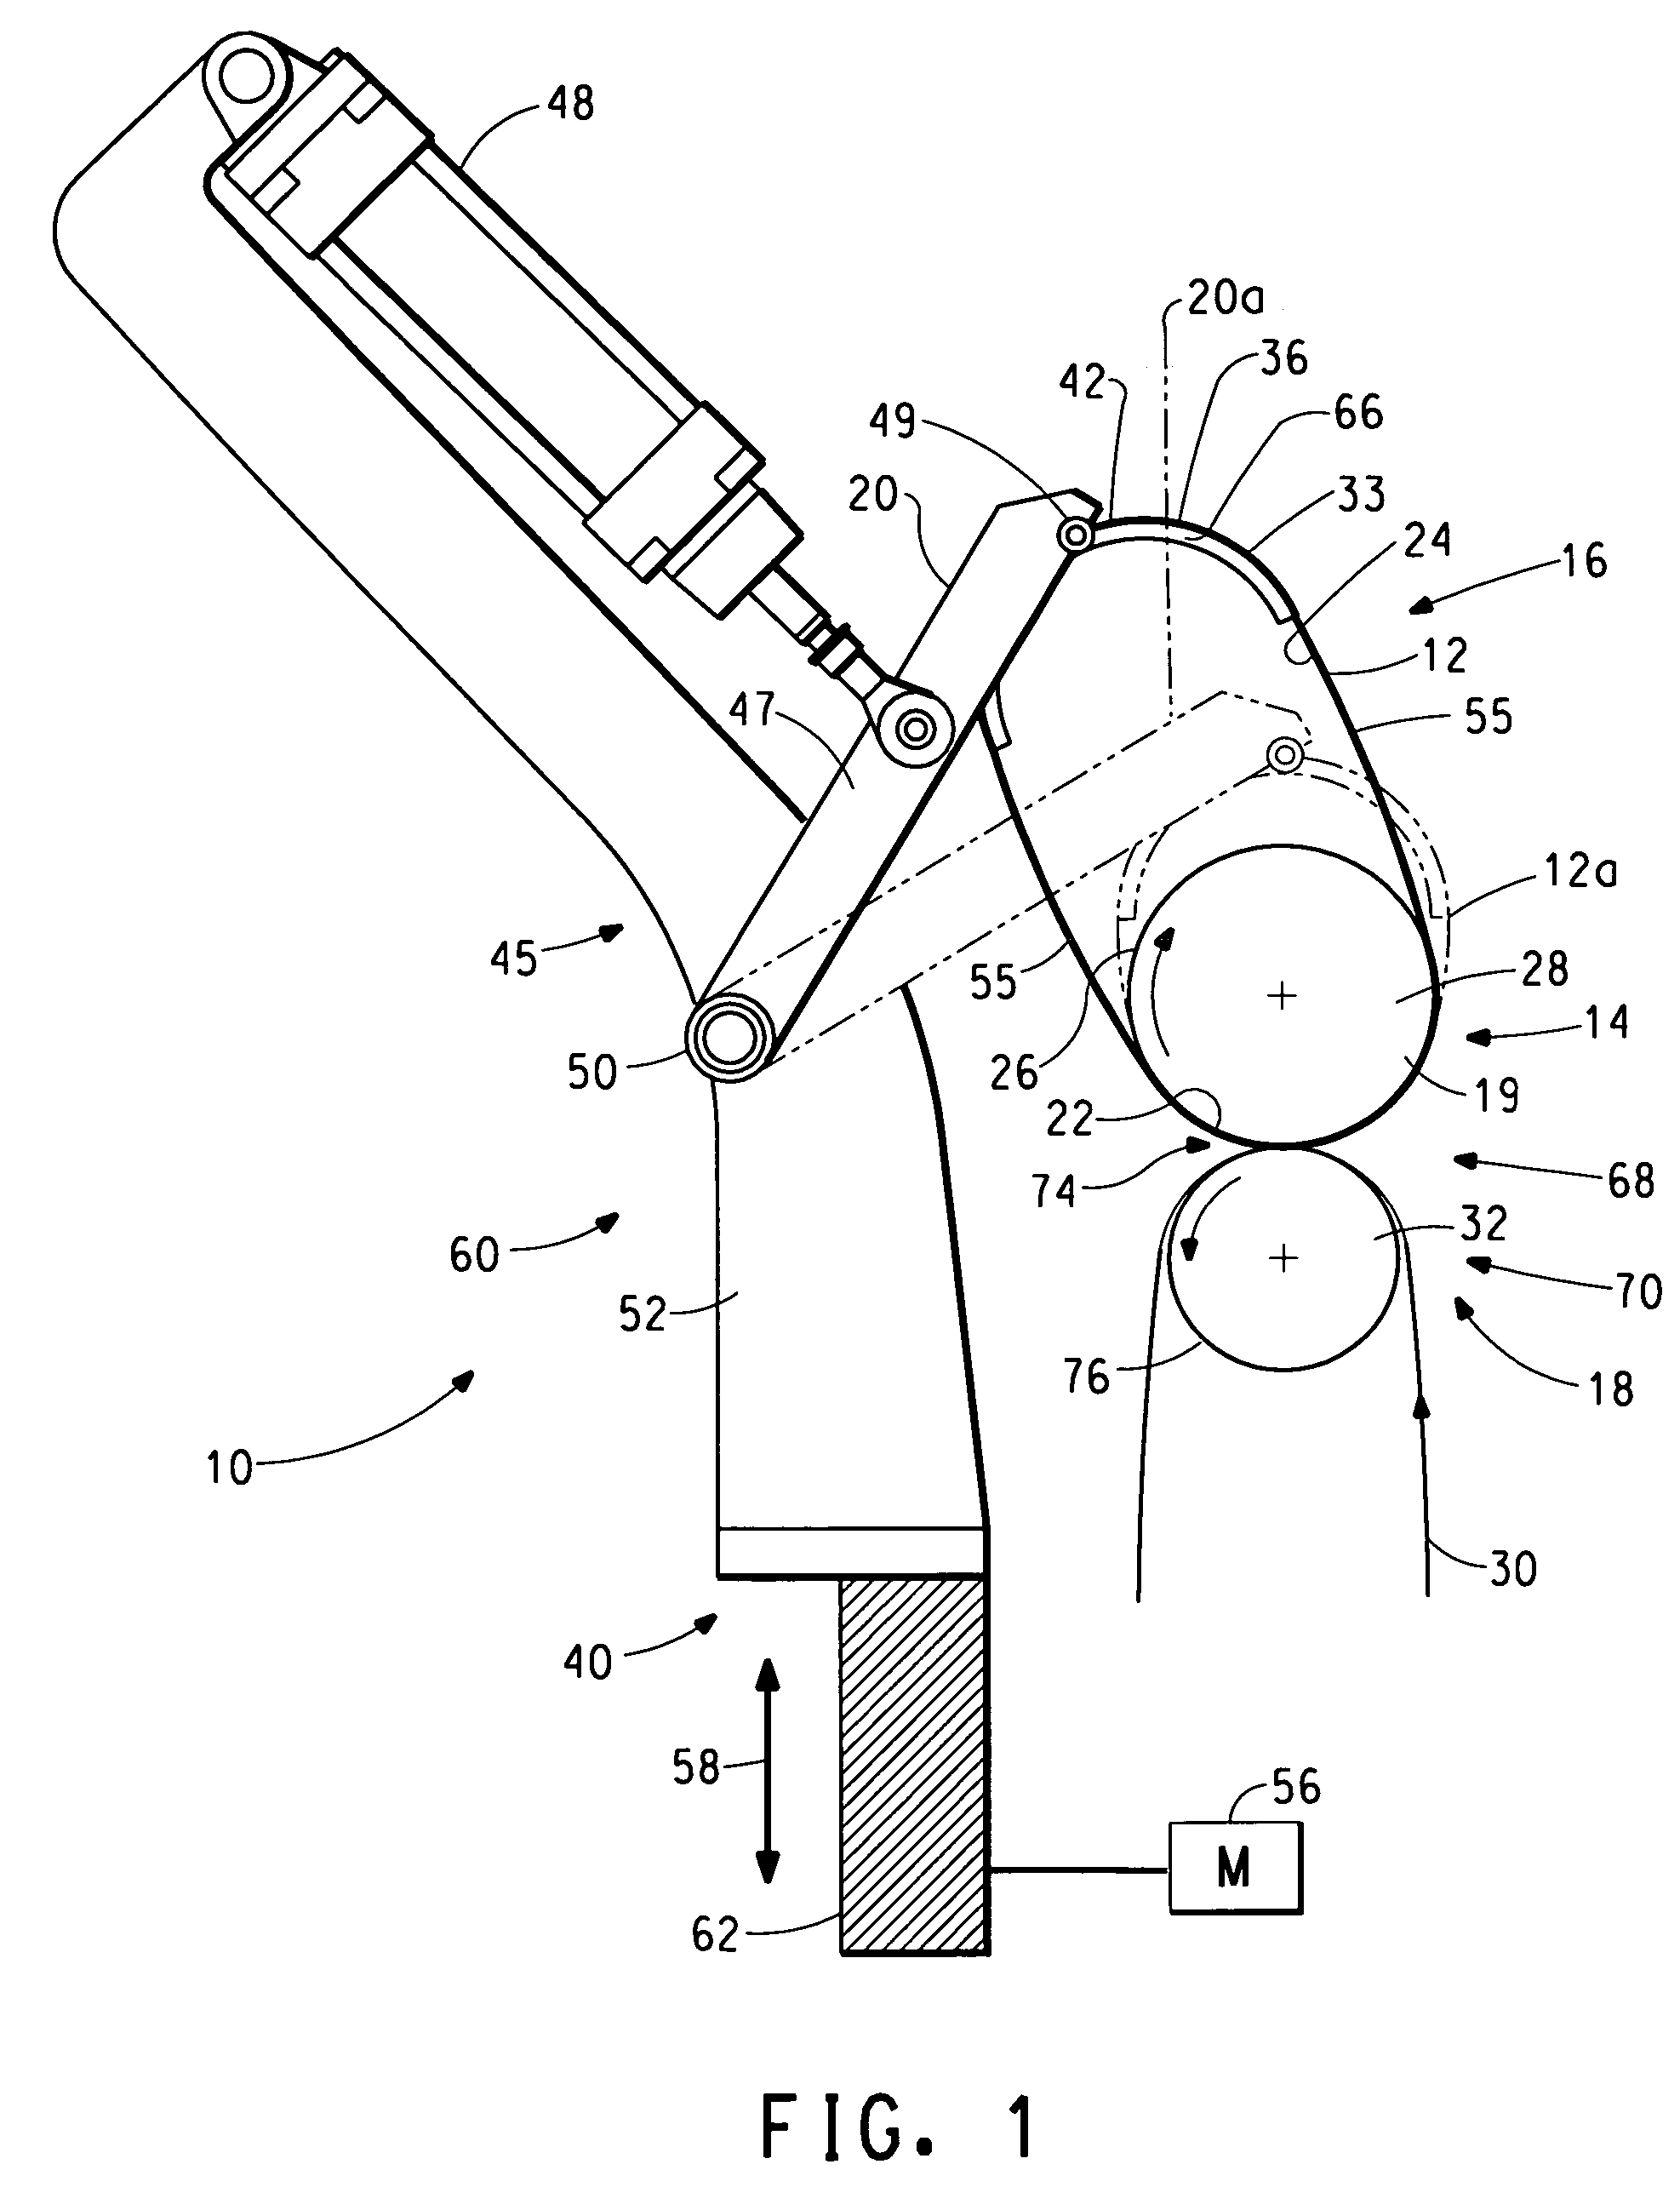 Apparatus and process for forming a printing form having a cylindrical support